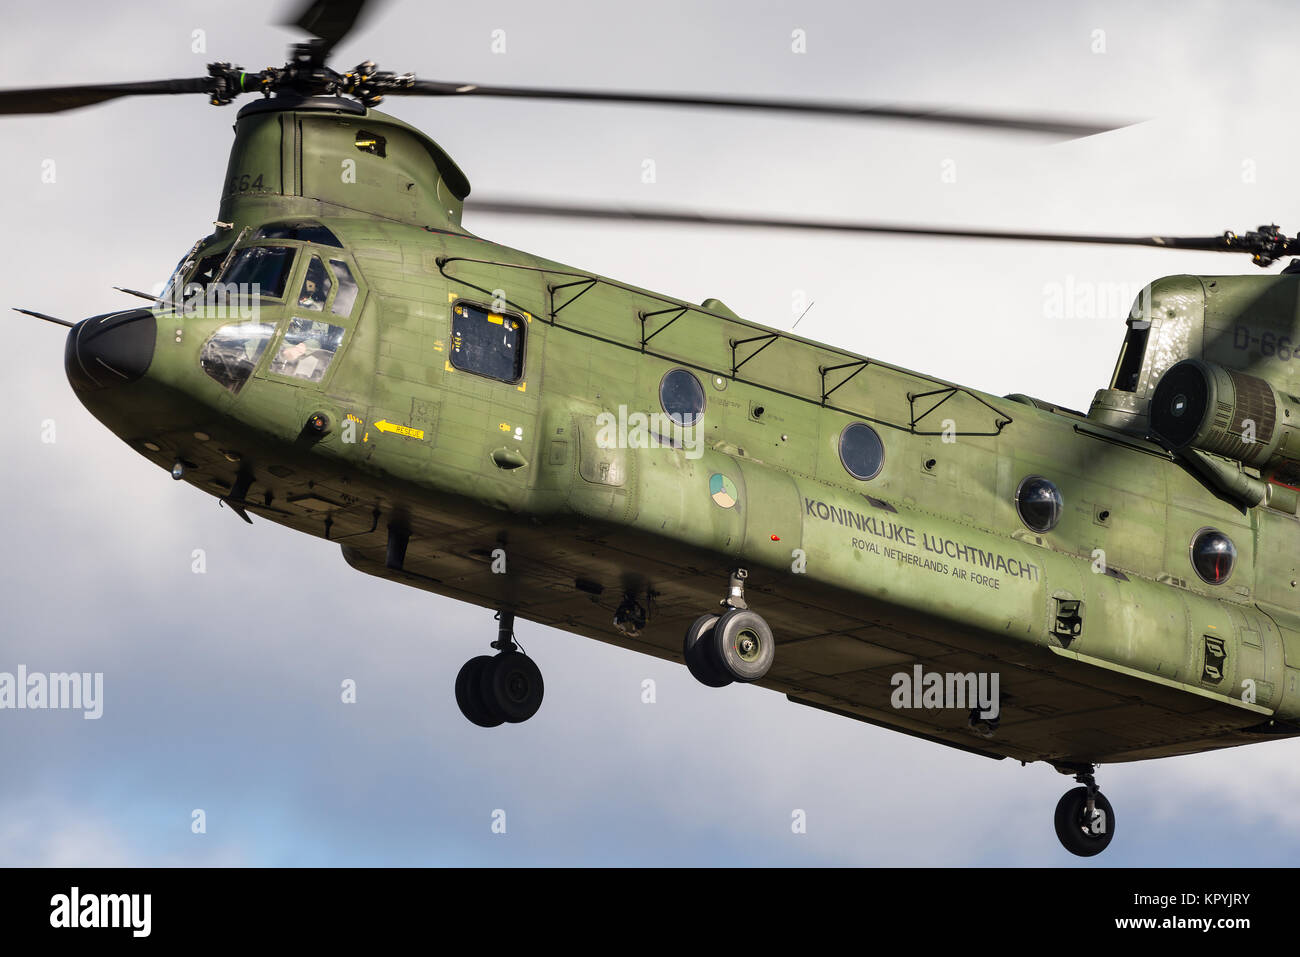 A Boeing CH-47 Chinook military transport helicopter of the Royal Netherlands Air Force. Stock Photo